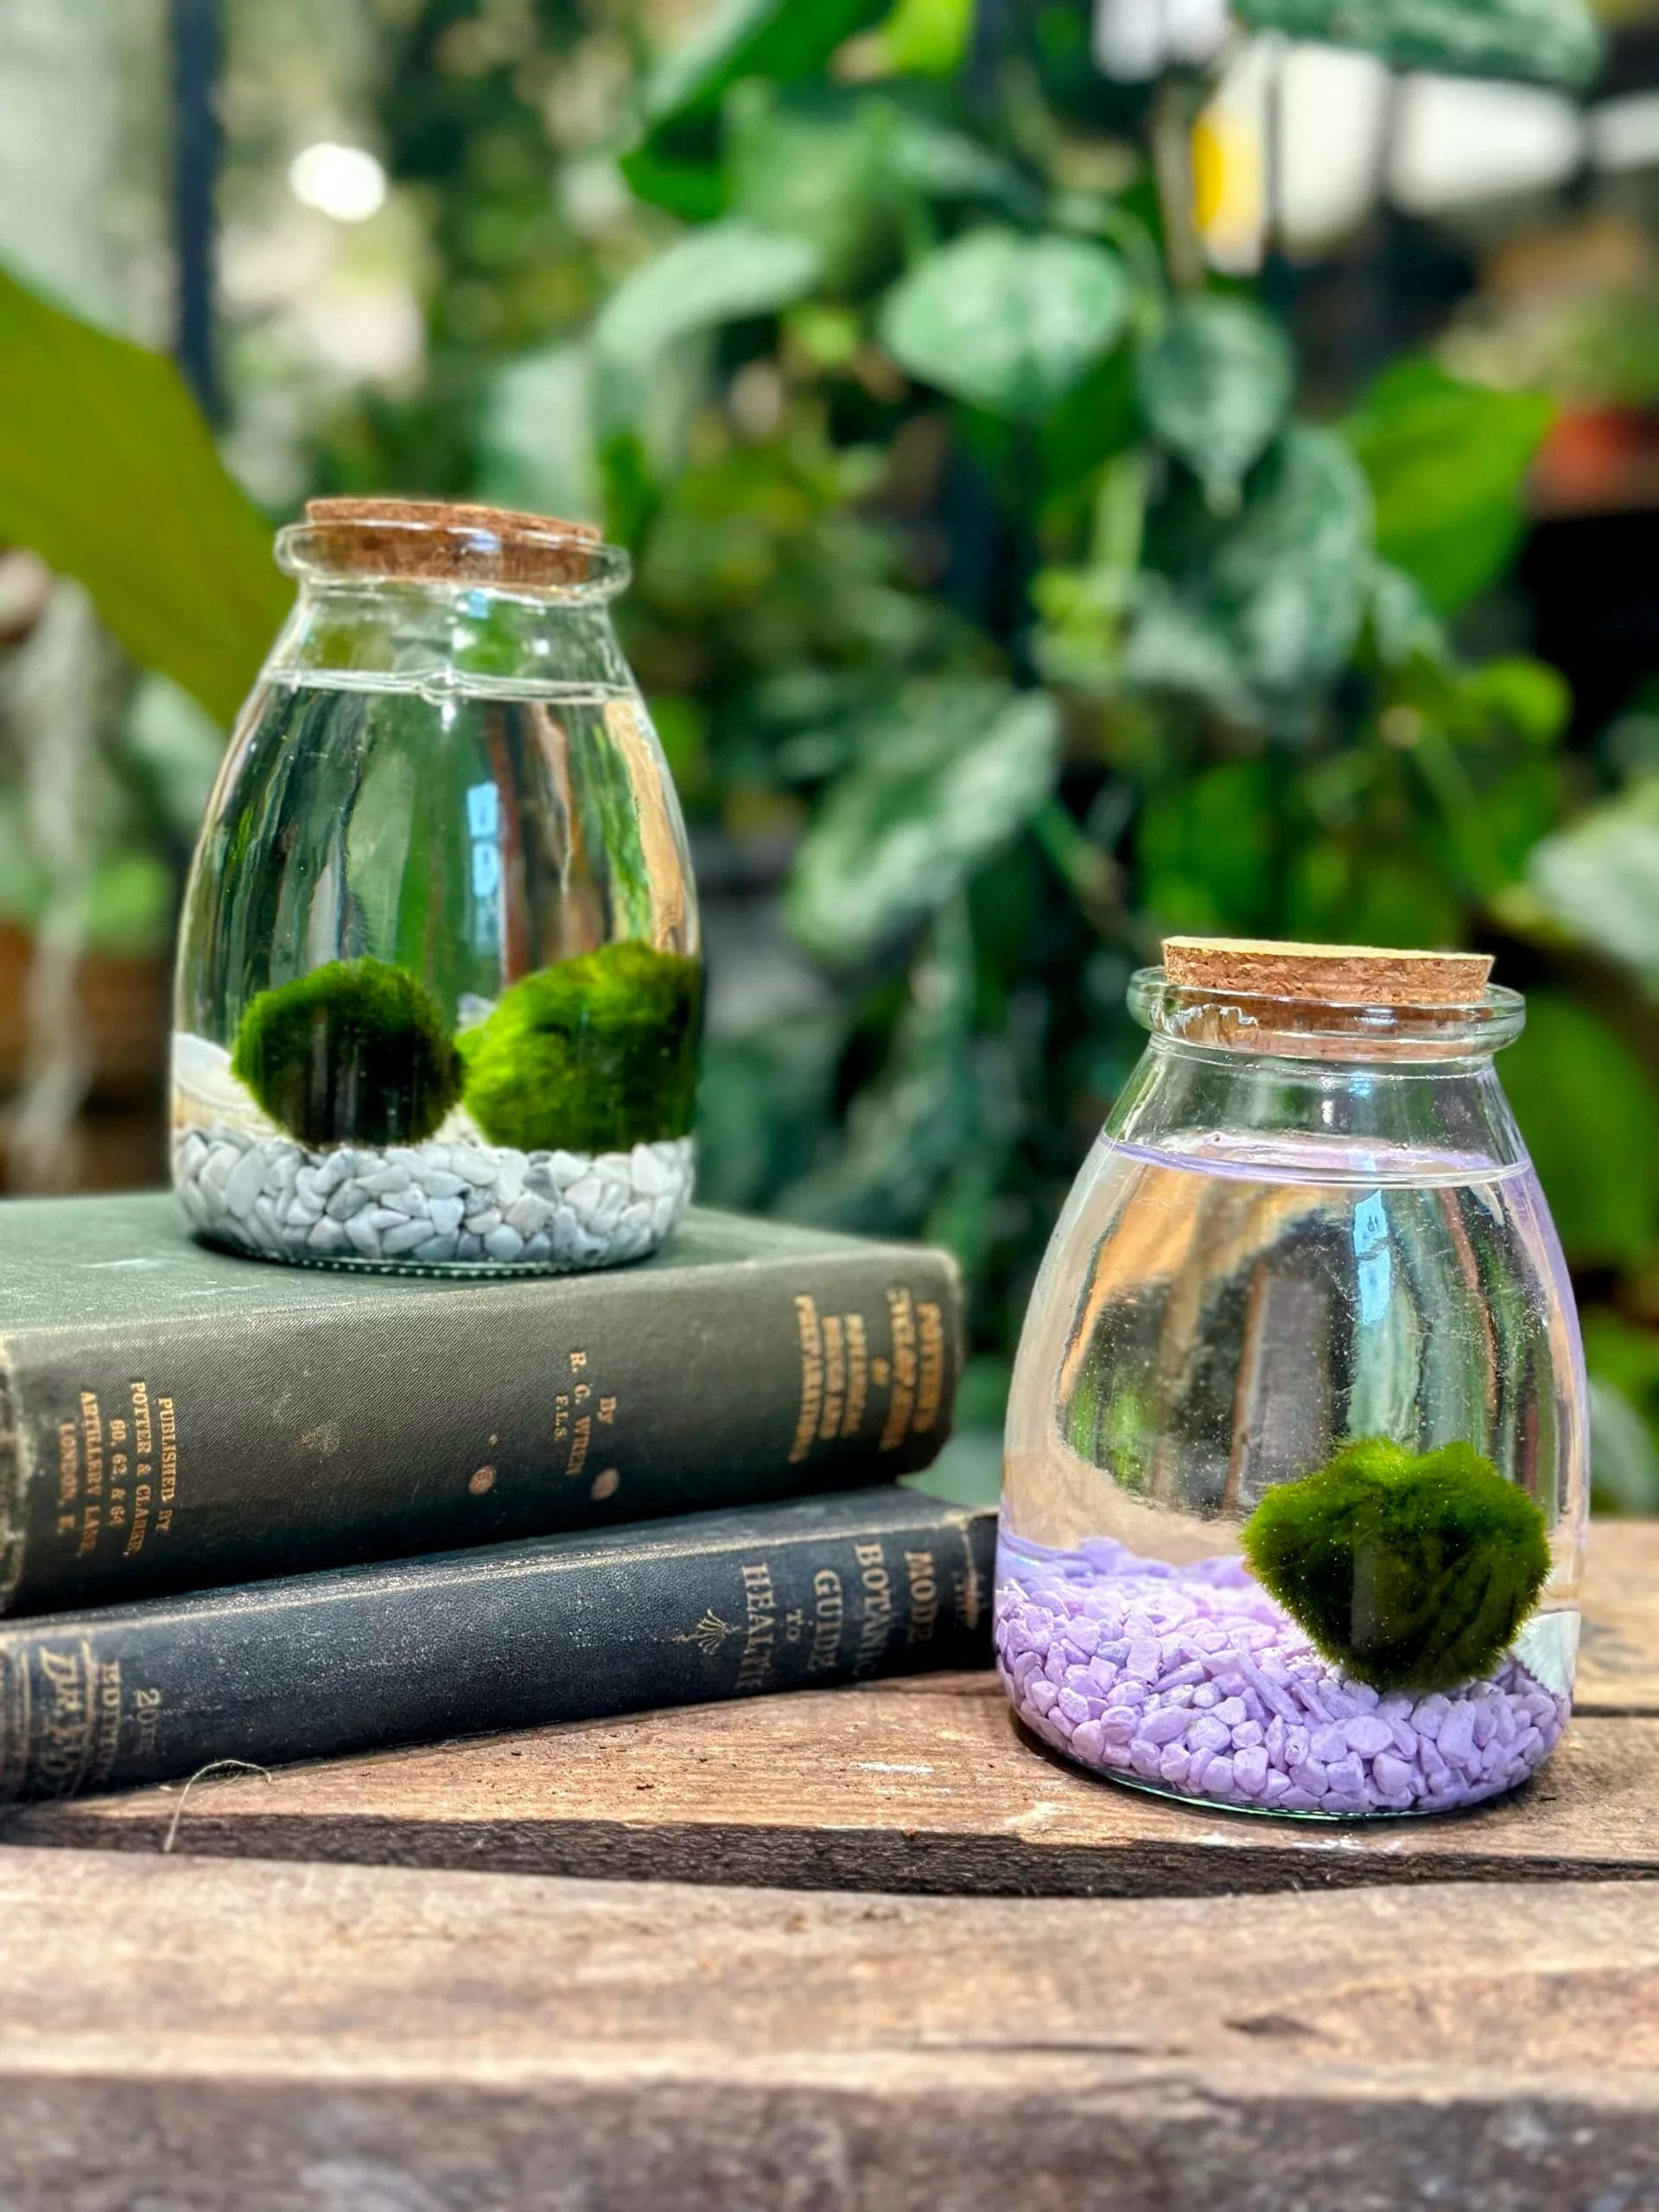 Marimo Moss Balls: A Comprehensive Guide and Fascinating Legends